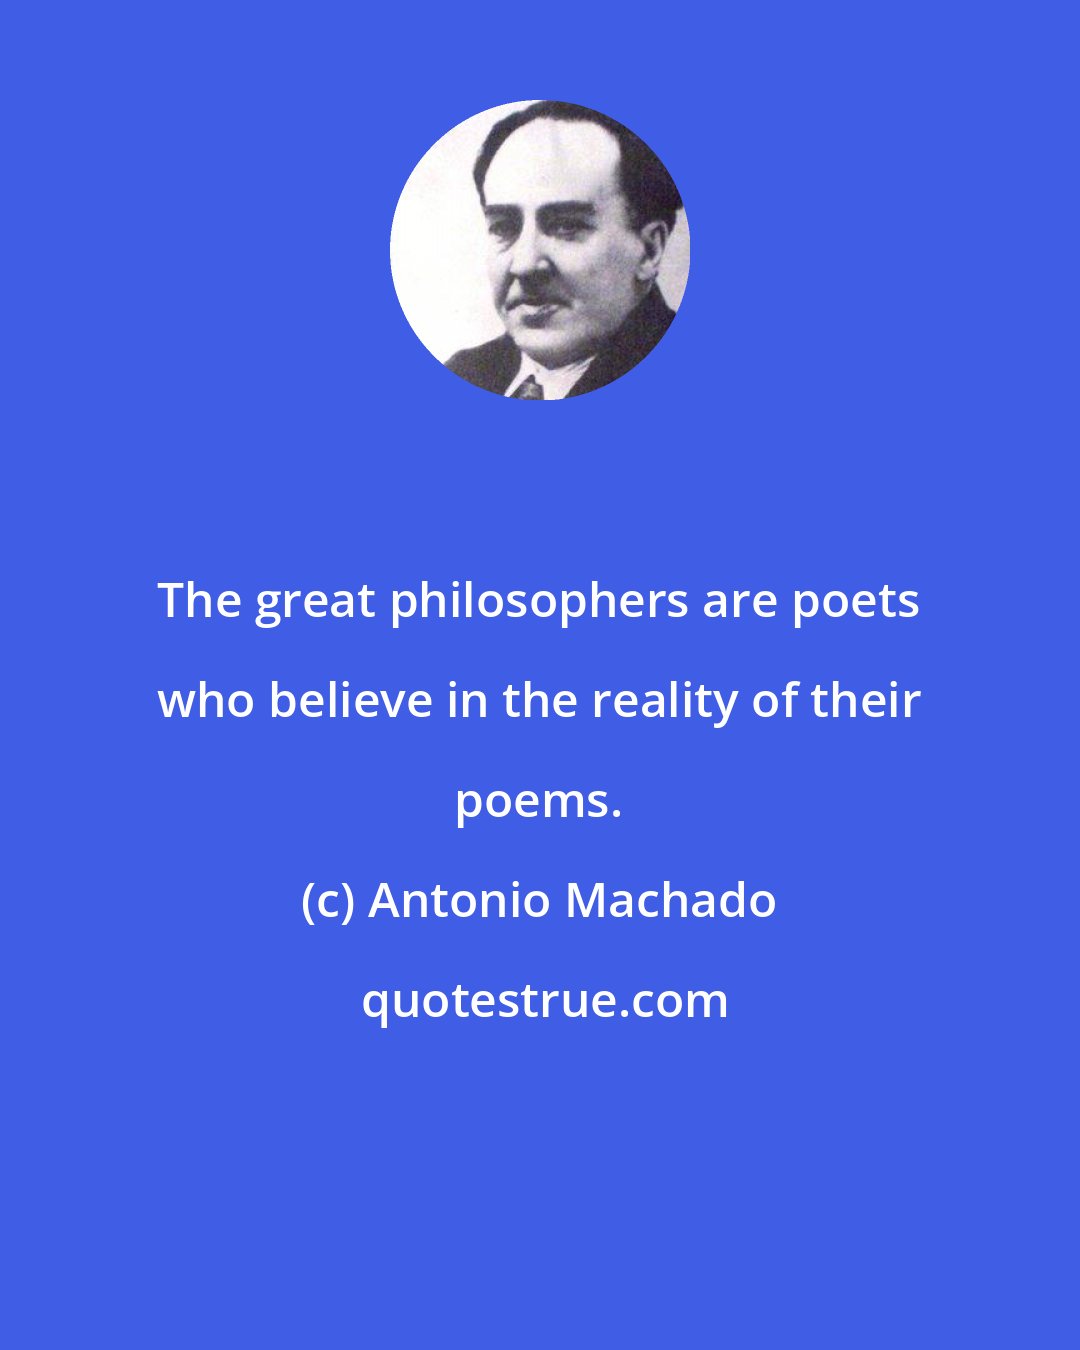 Antonio Machado: The great philosophers are poets who believe in the reality of their poems.